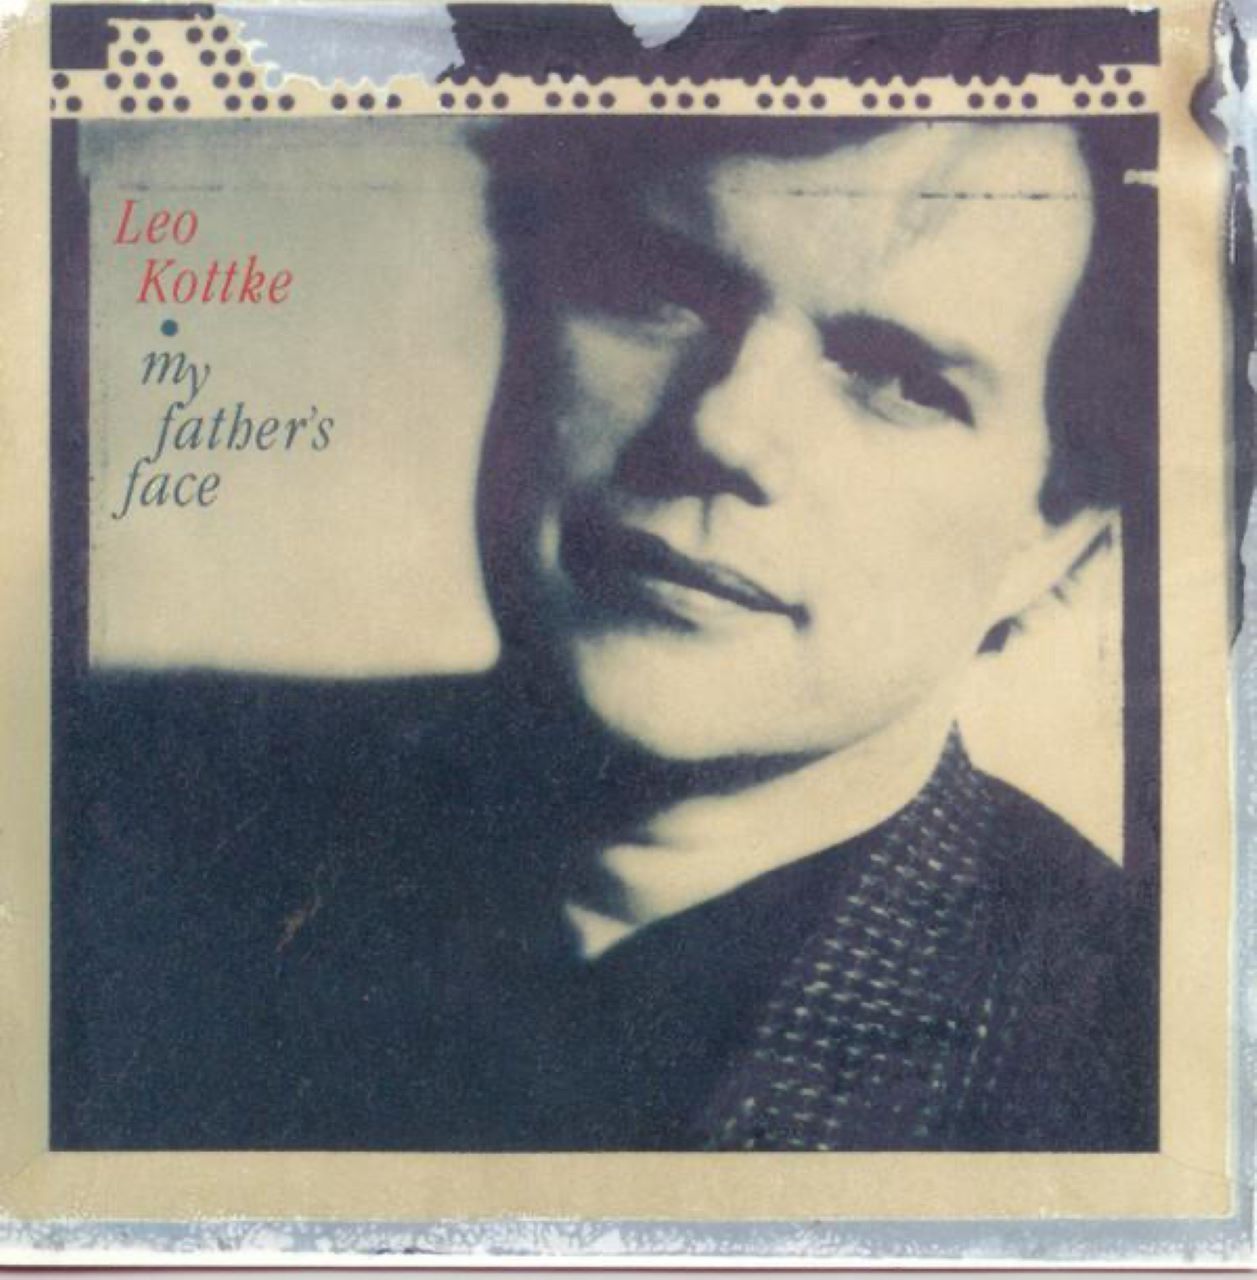 Leo Kottke - My Father's Face cover album